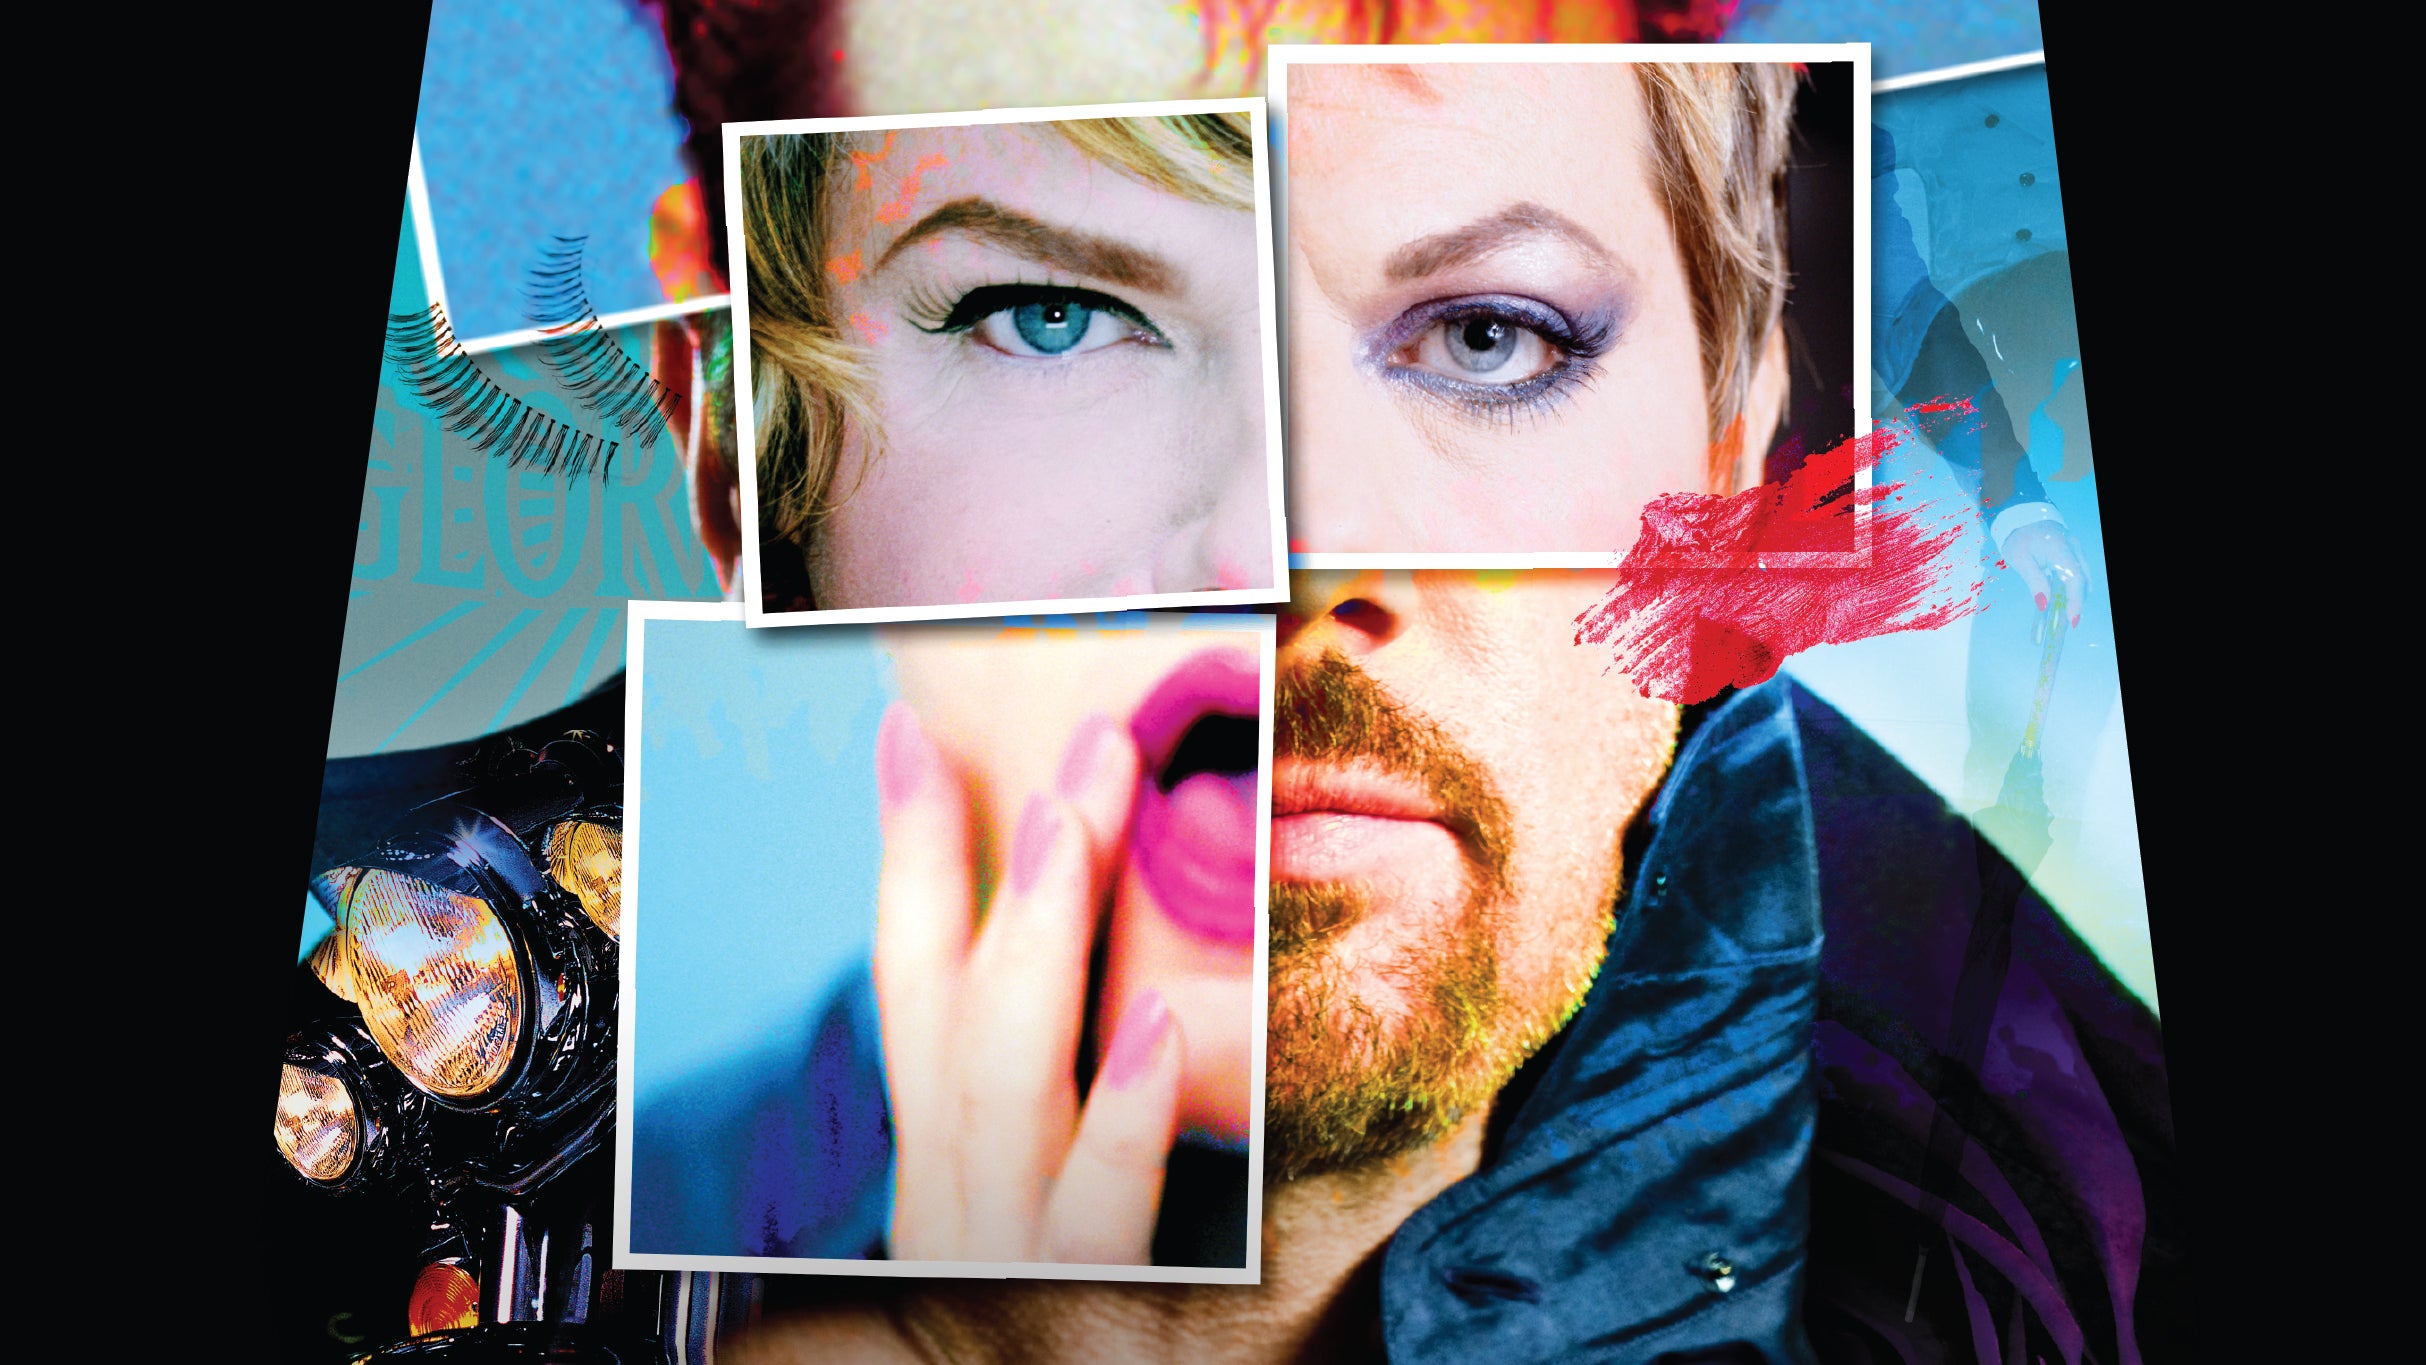 EDDIE IZZARD The Remix: The First 35 Years pre-sale code for your tickets in Denver